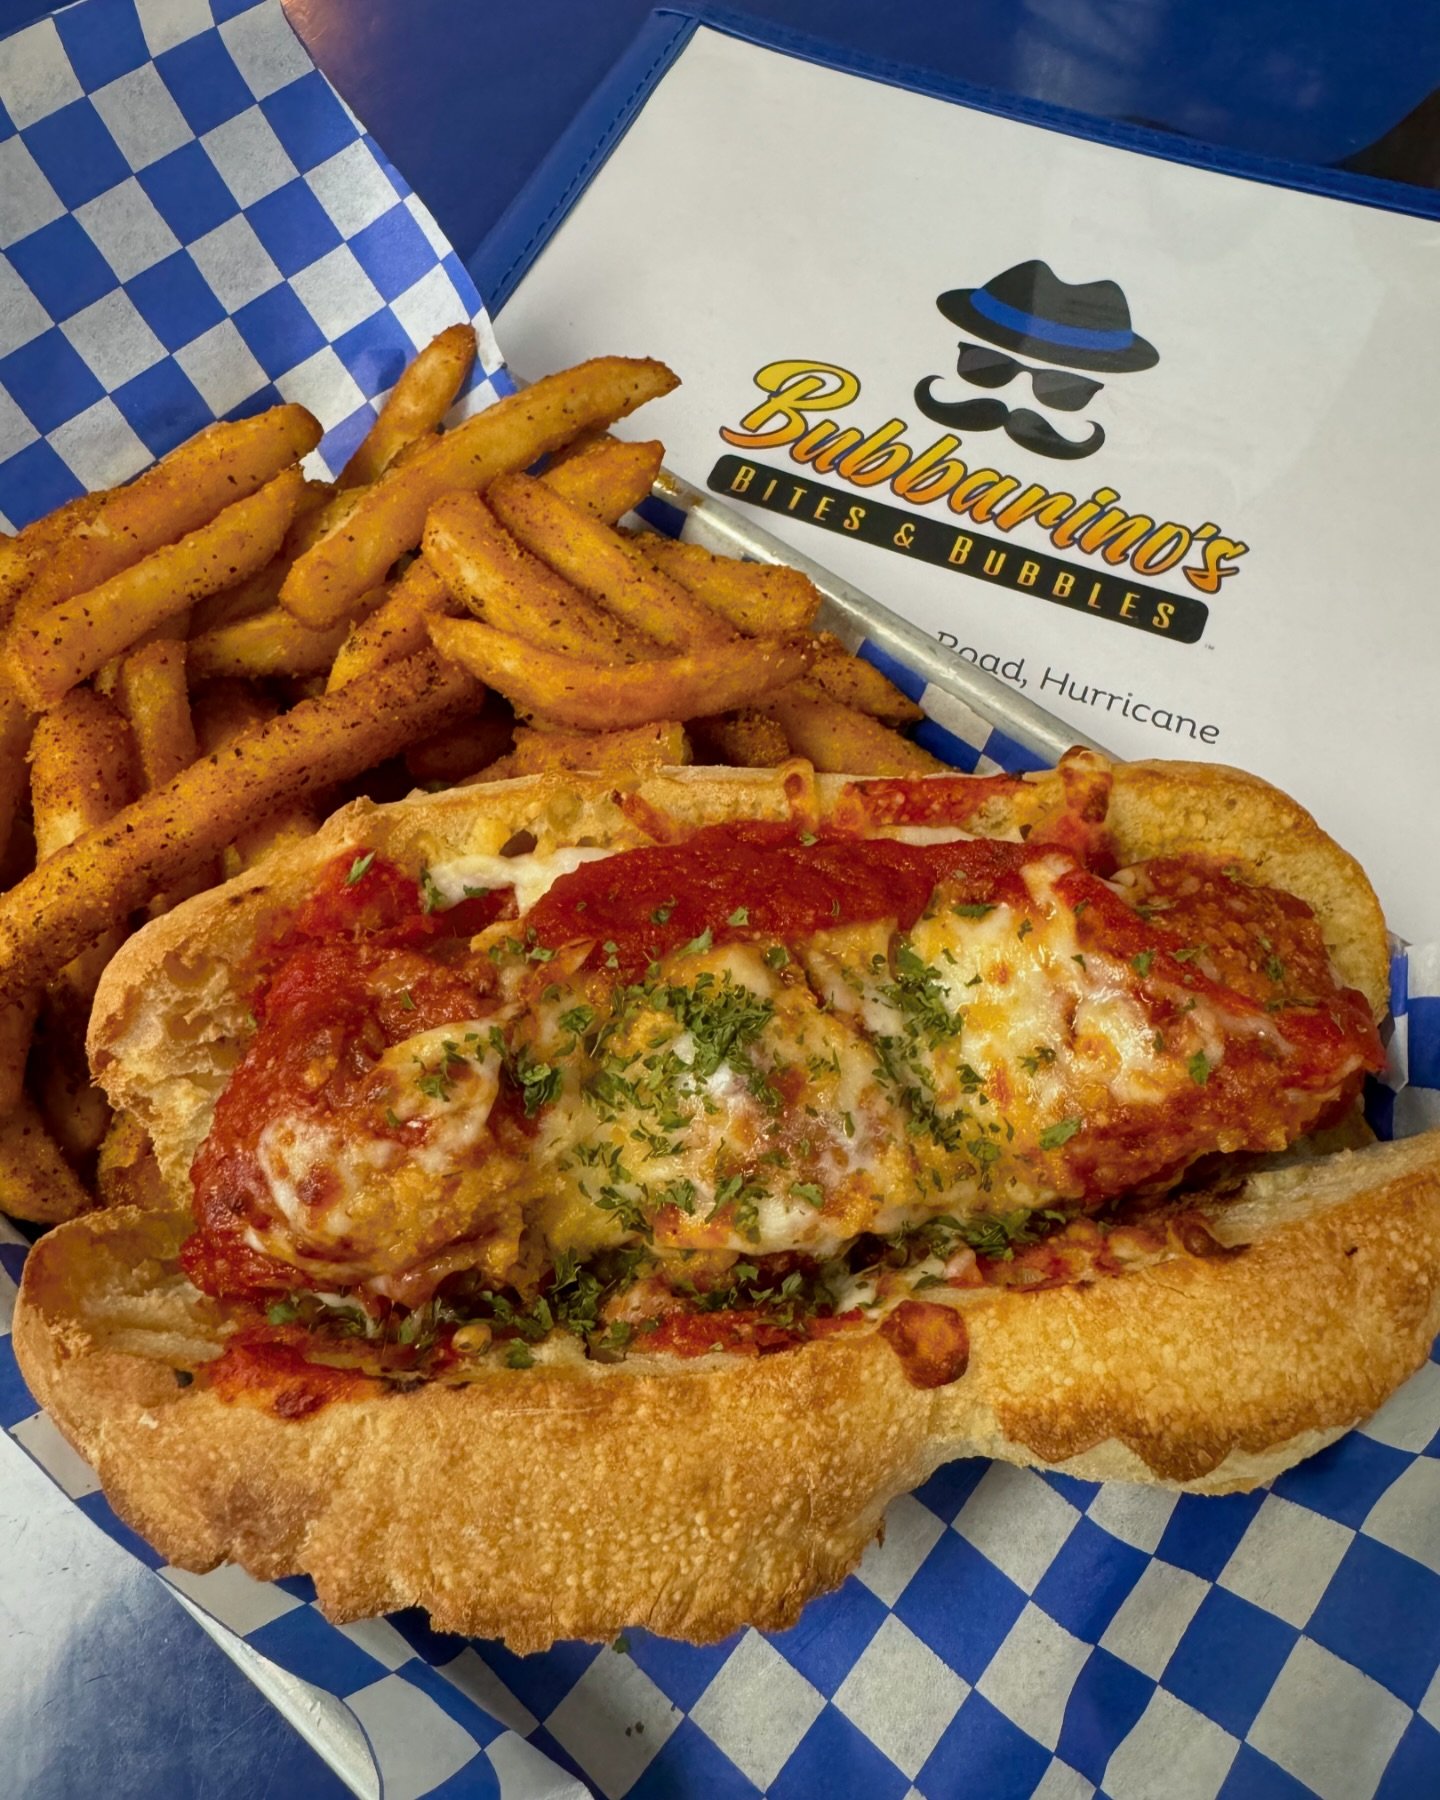 Meatball Sub available for a limited time starting tomorrow at 11 AM! 😎

📍 3501 Teays Valley Road, Hurricane 
💻 Order online - bubbarinos.com 
📞 Call now - 304.397.6037